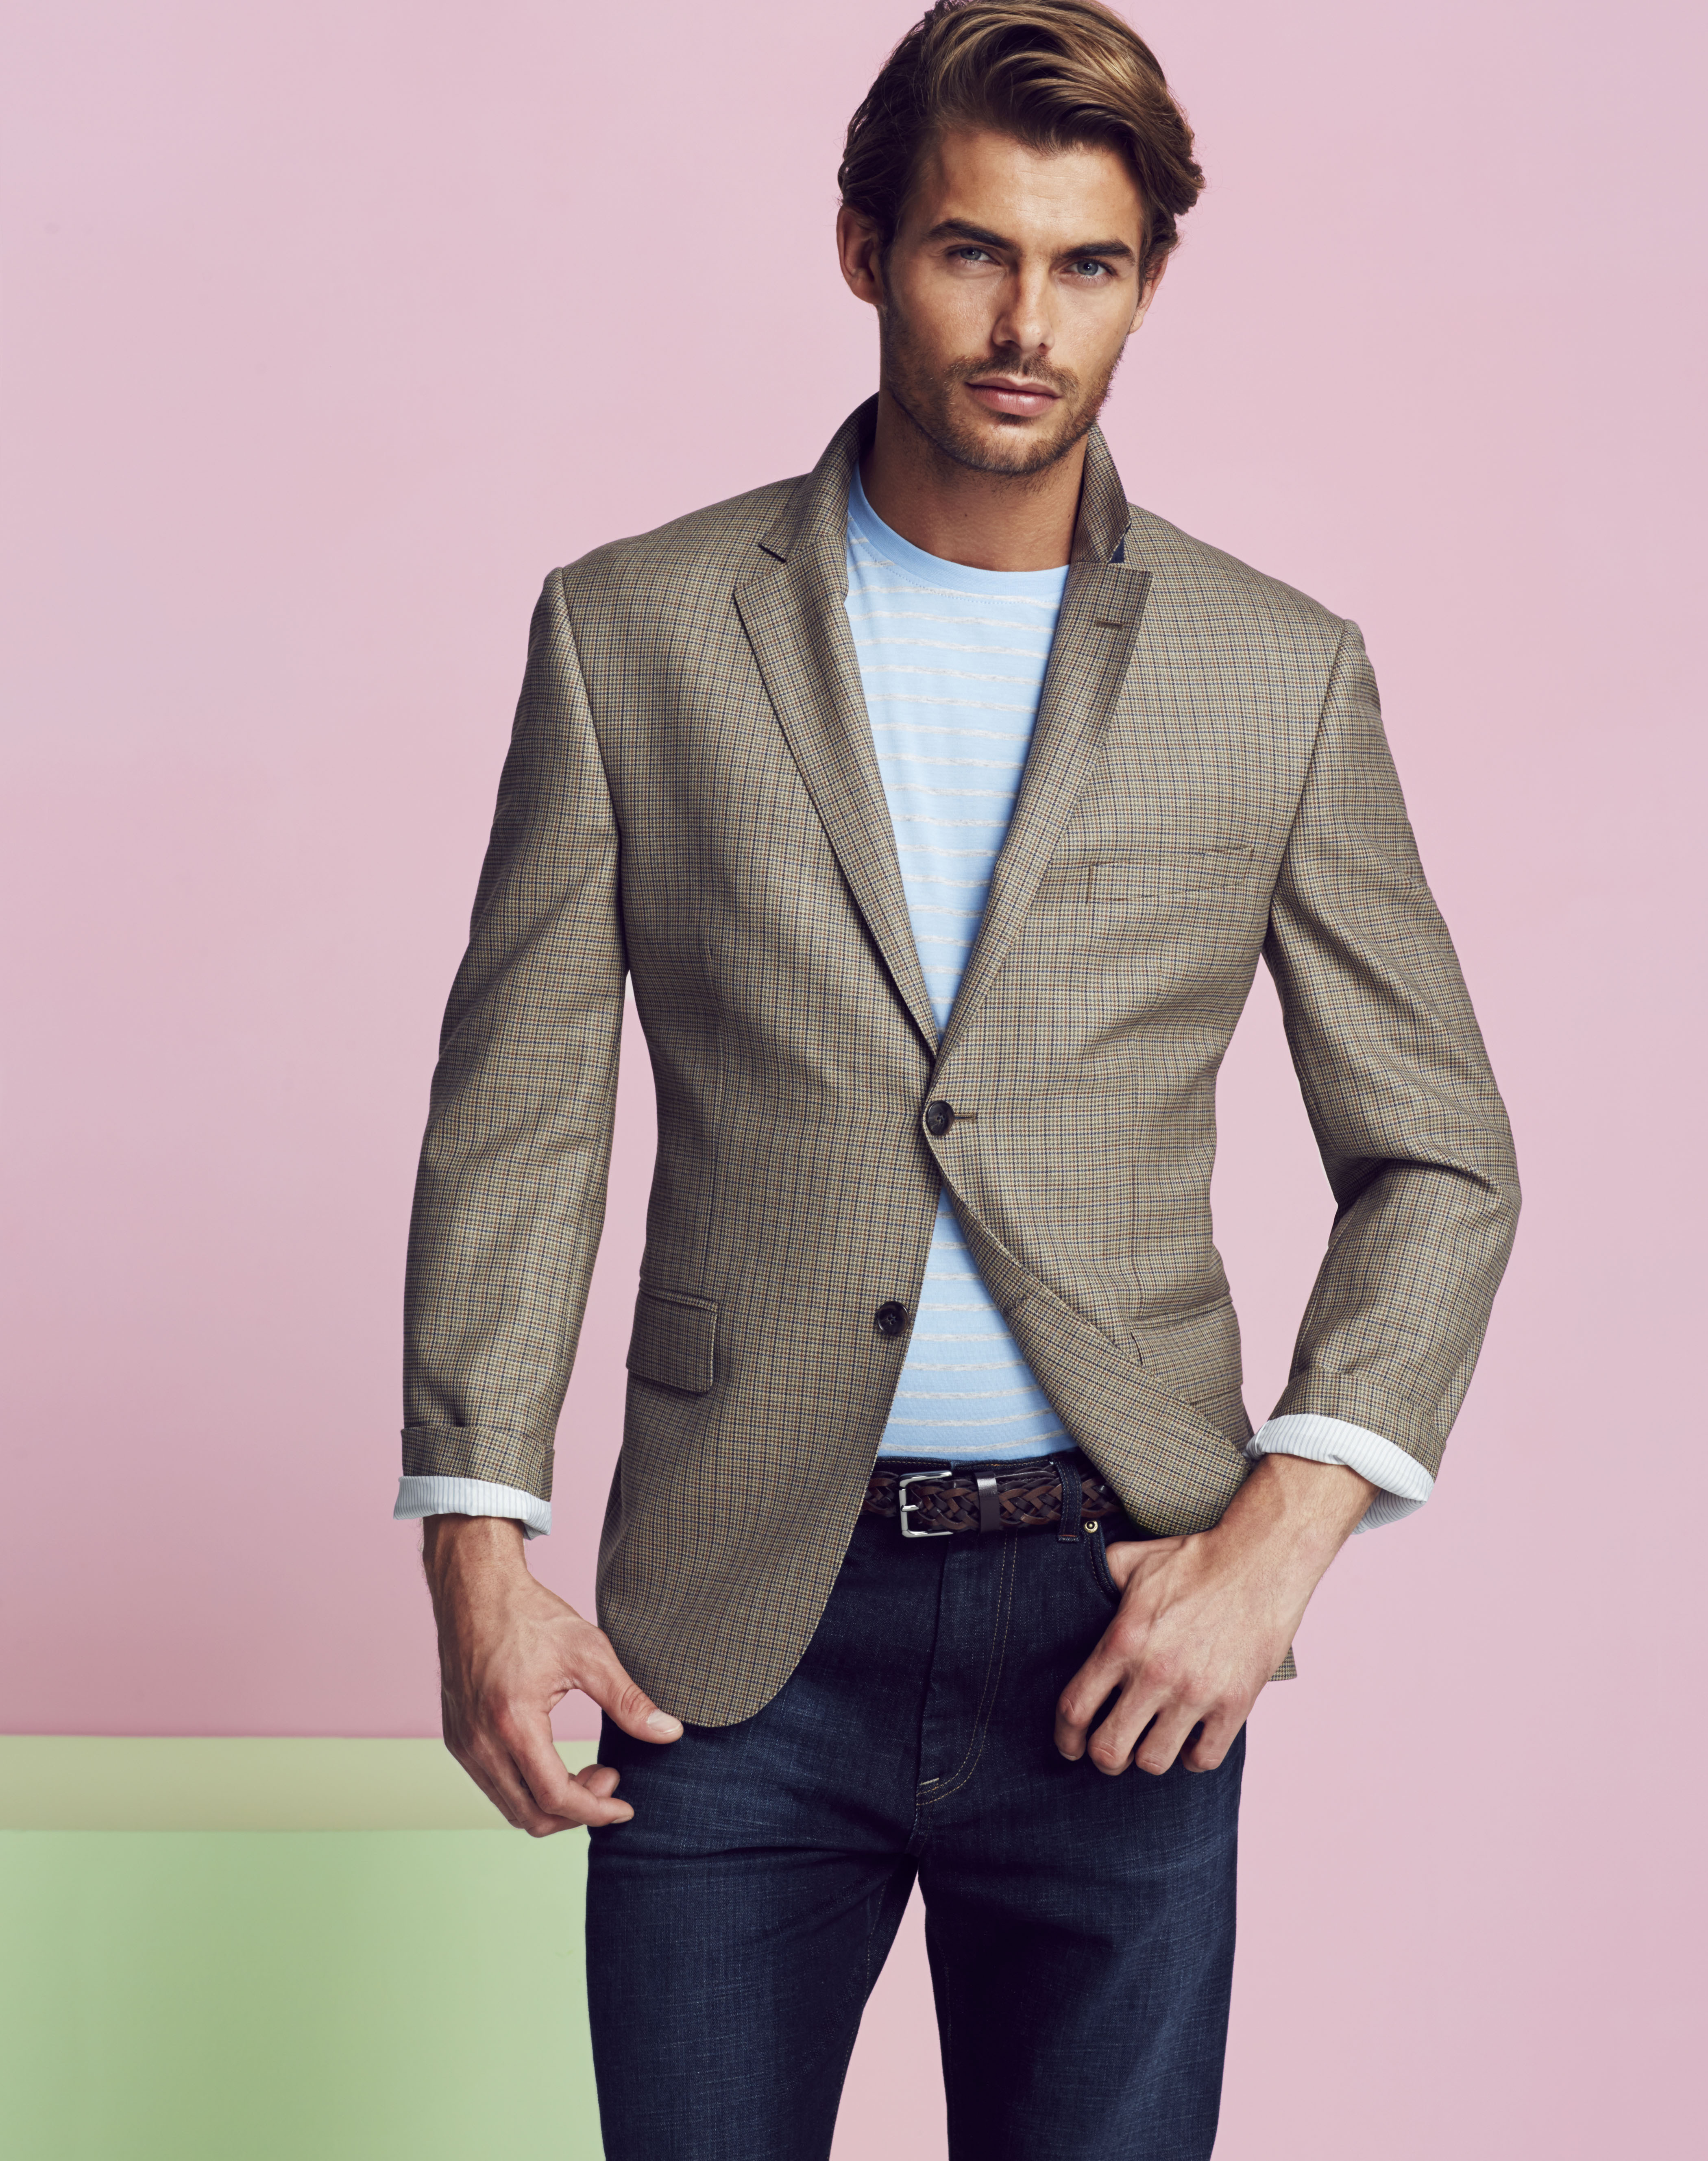 Spring 2014 Trend Report—Cool Colored Suits